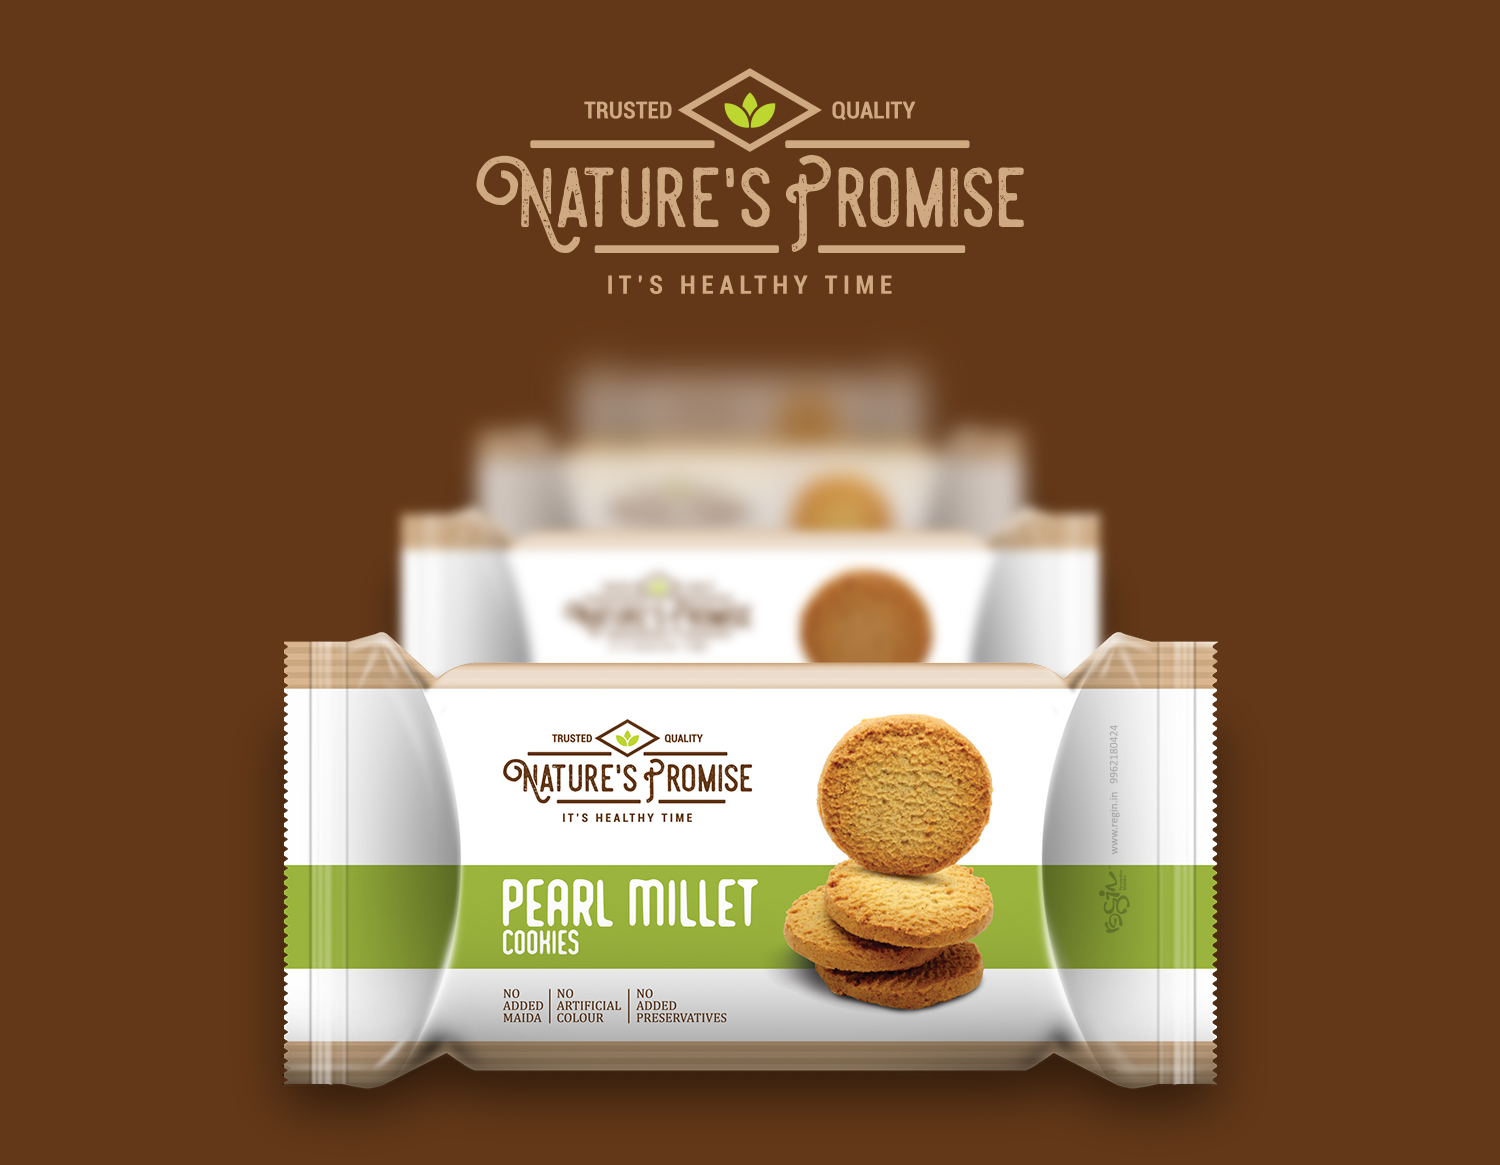 Nature's Promise Millet Cookies packaging design